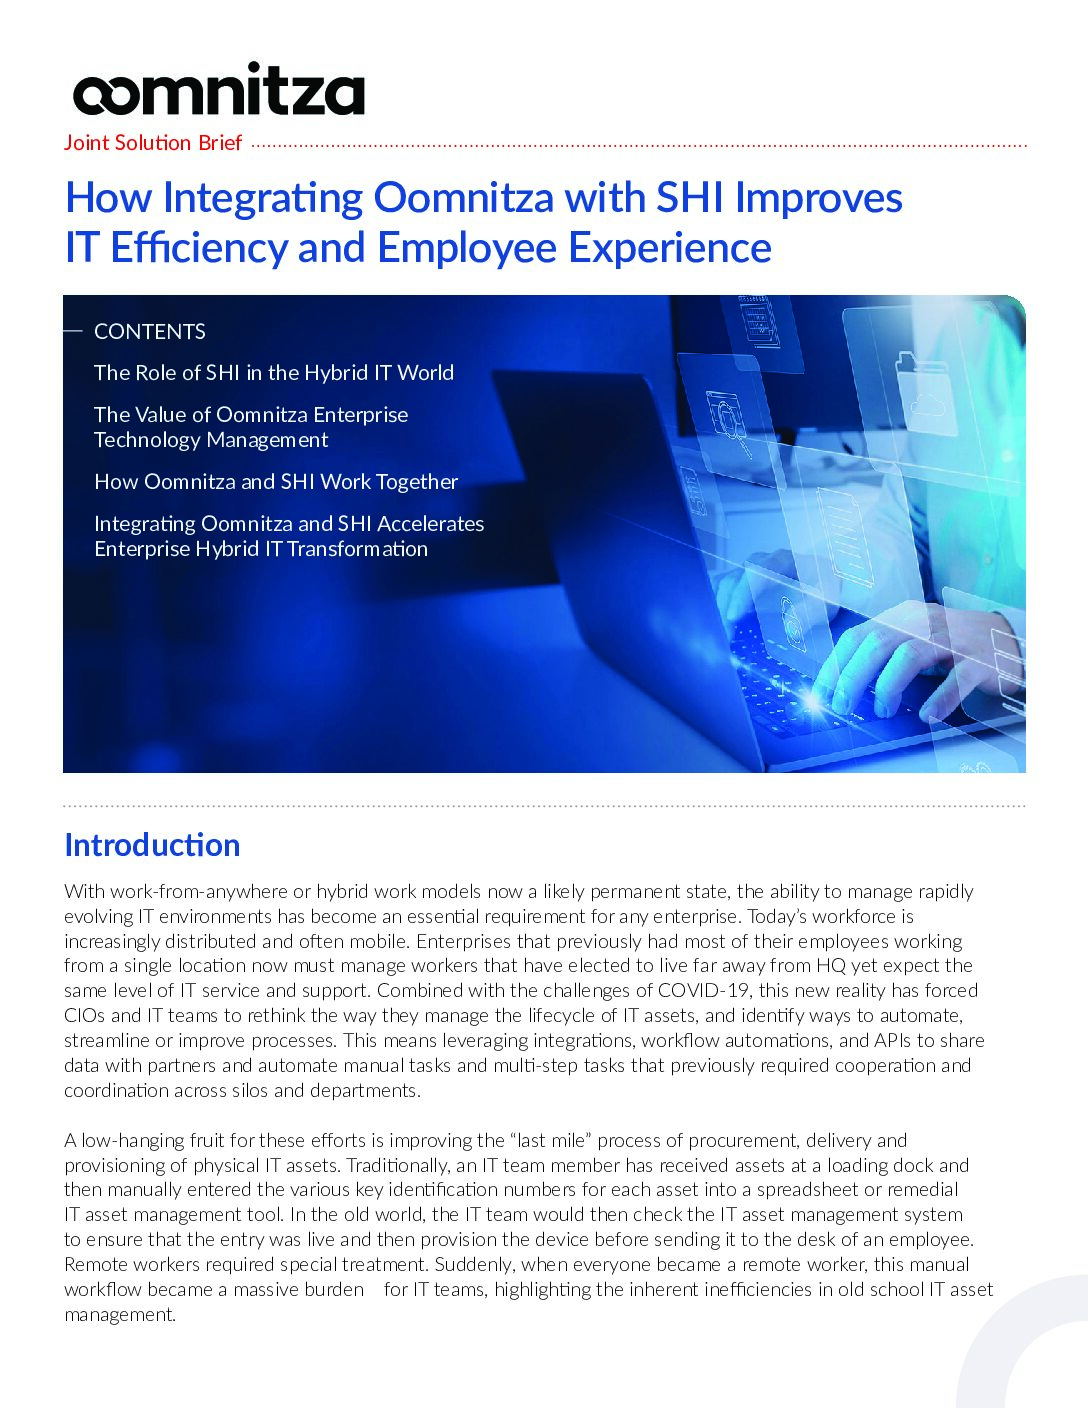 Featured image for How Integrating Oomnitza with SHI Improves IT Efficiency and Employee Experience